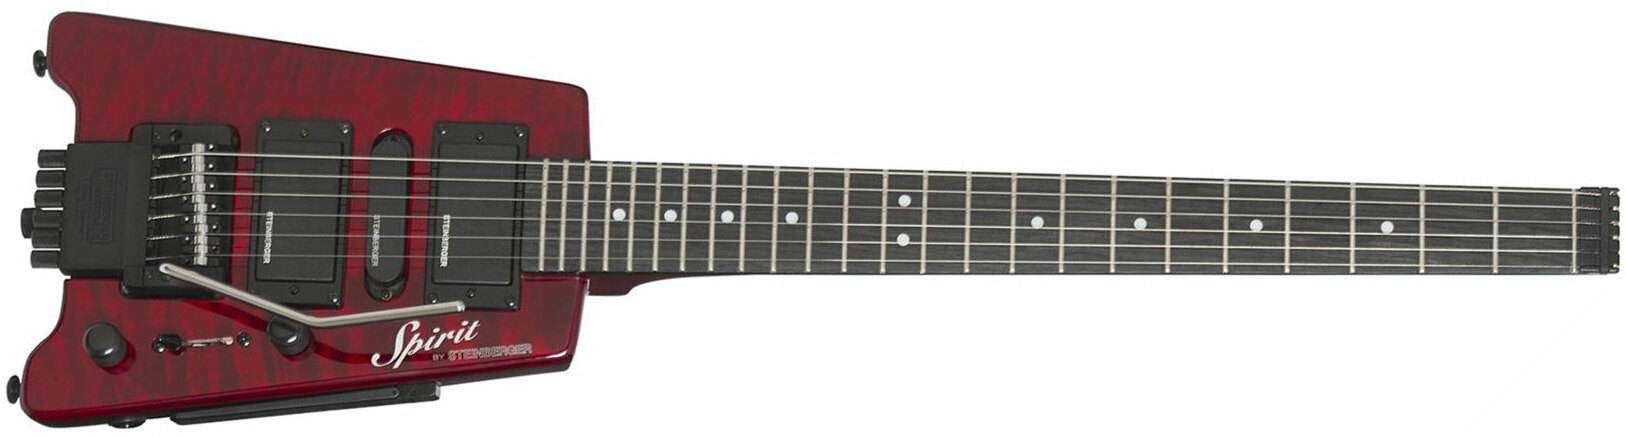 Steinberger Gt-pro Deluxe Quilt Top Outfit Hsh Trem Rw +housse - Wine Red - Guitare Électrique Voyage - Main picture